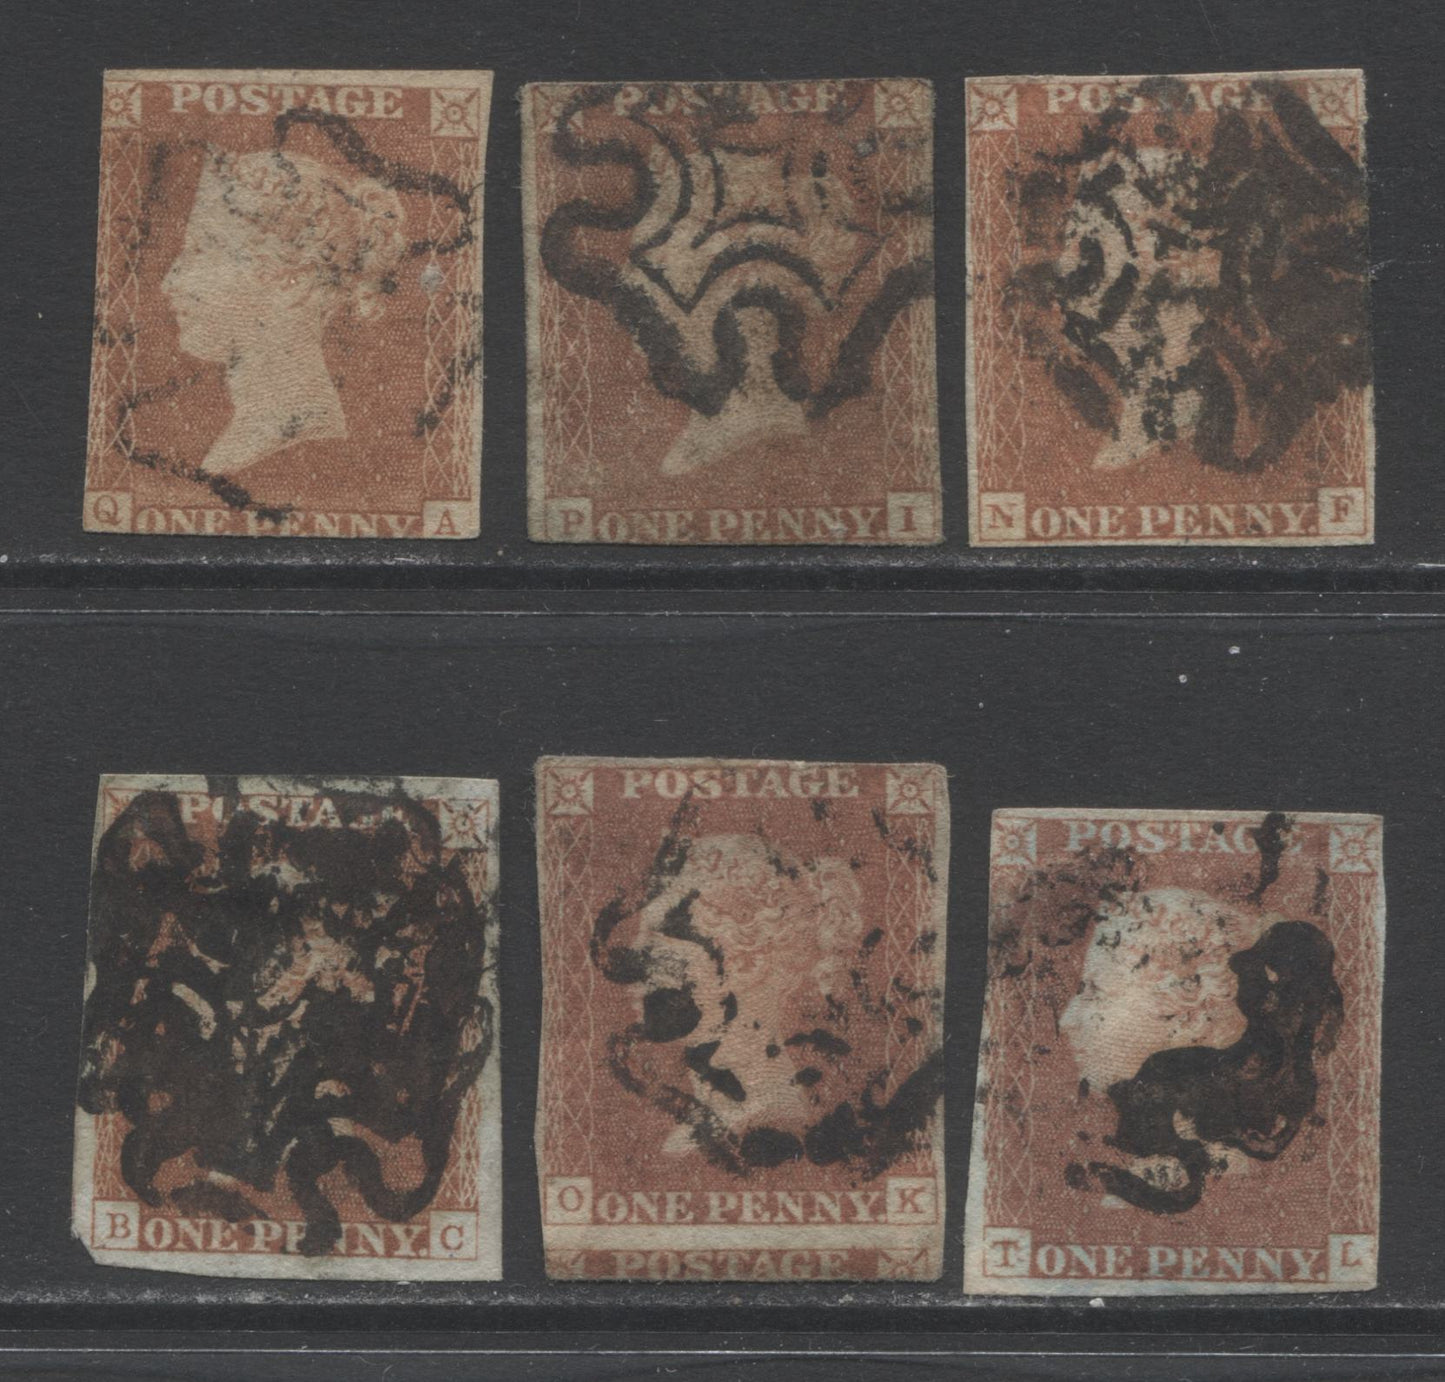 Lot 350 Great Britain SC#3 1841 Red Penny Issue, An Ungraded Study Lot of 6 2-3 Margin Examples, With Maltese Cross Cancels, Likely Printed From Plates 1-11, 2017 Scott Cat. $350+, Est. $30, Click on Listing to See ALL Pictures